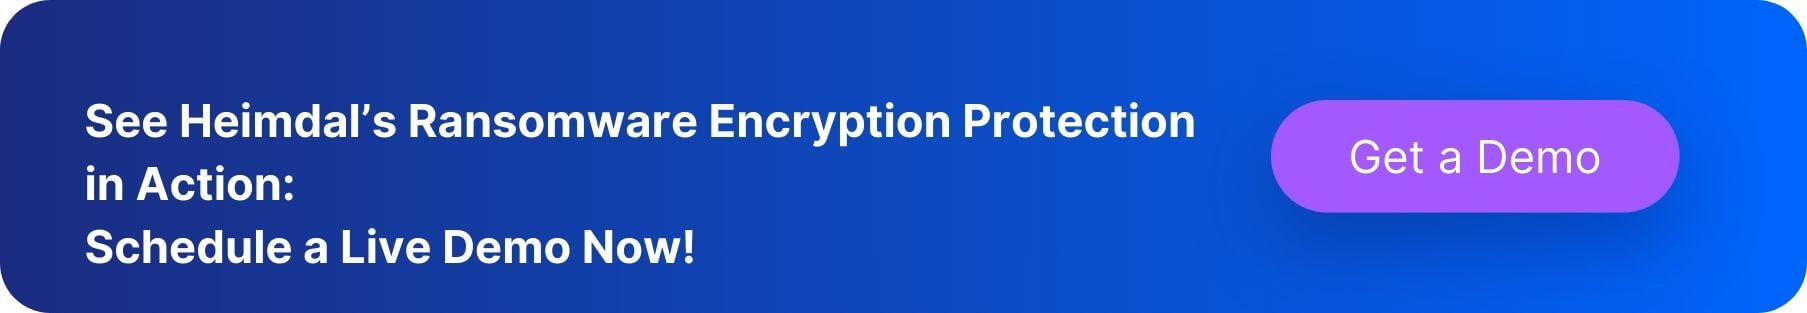 ransomware encryption protection